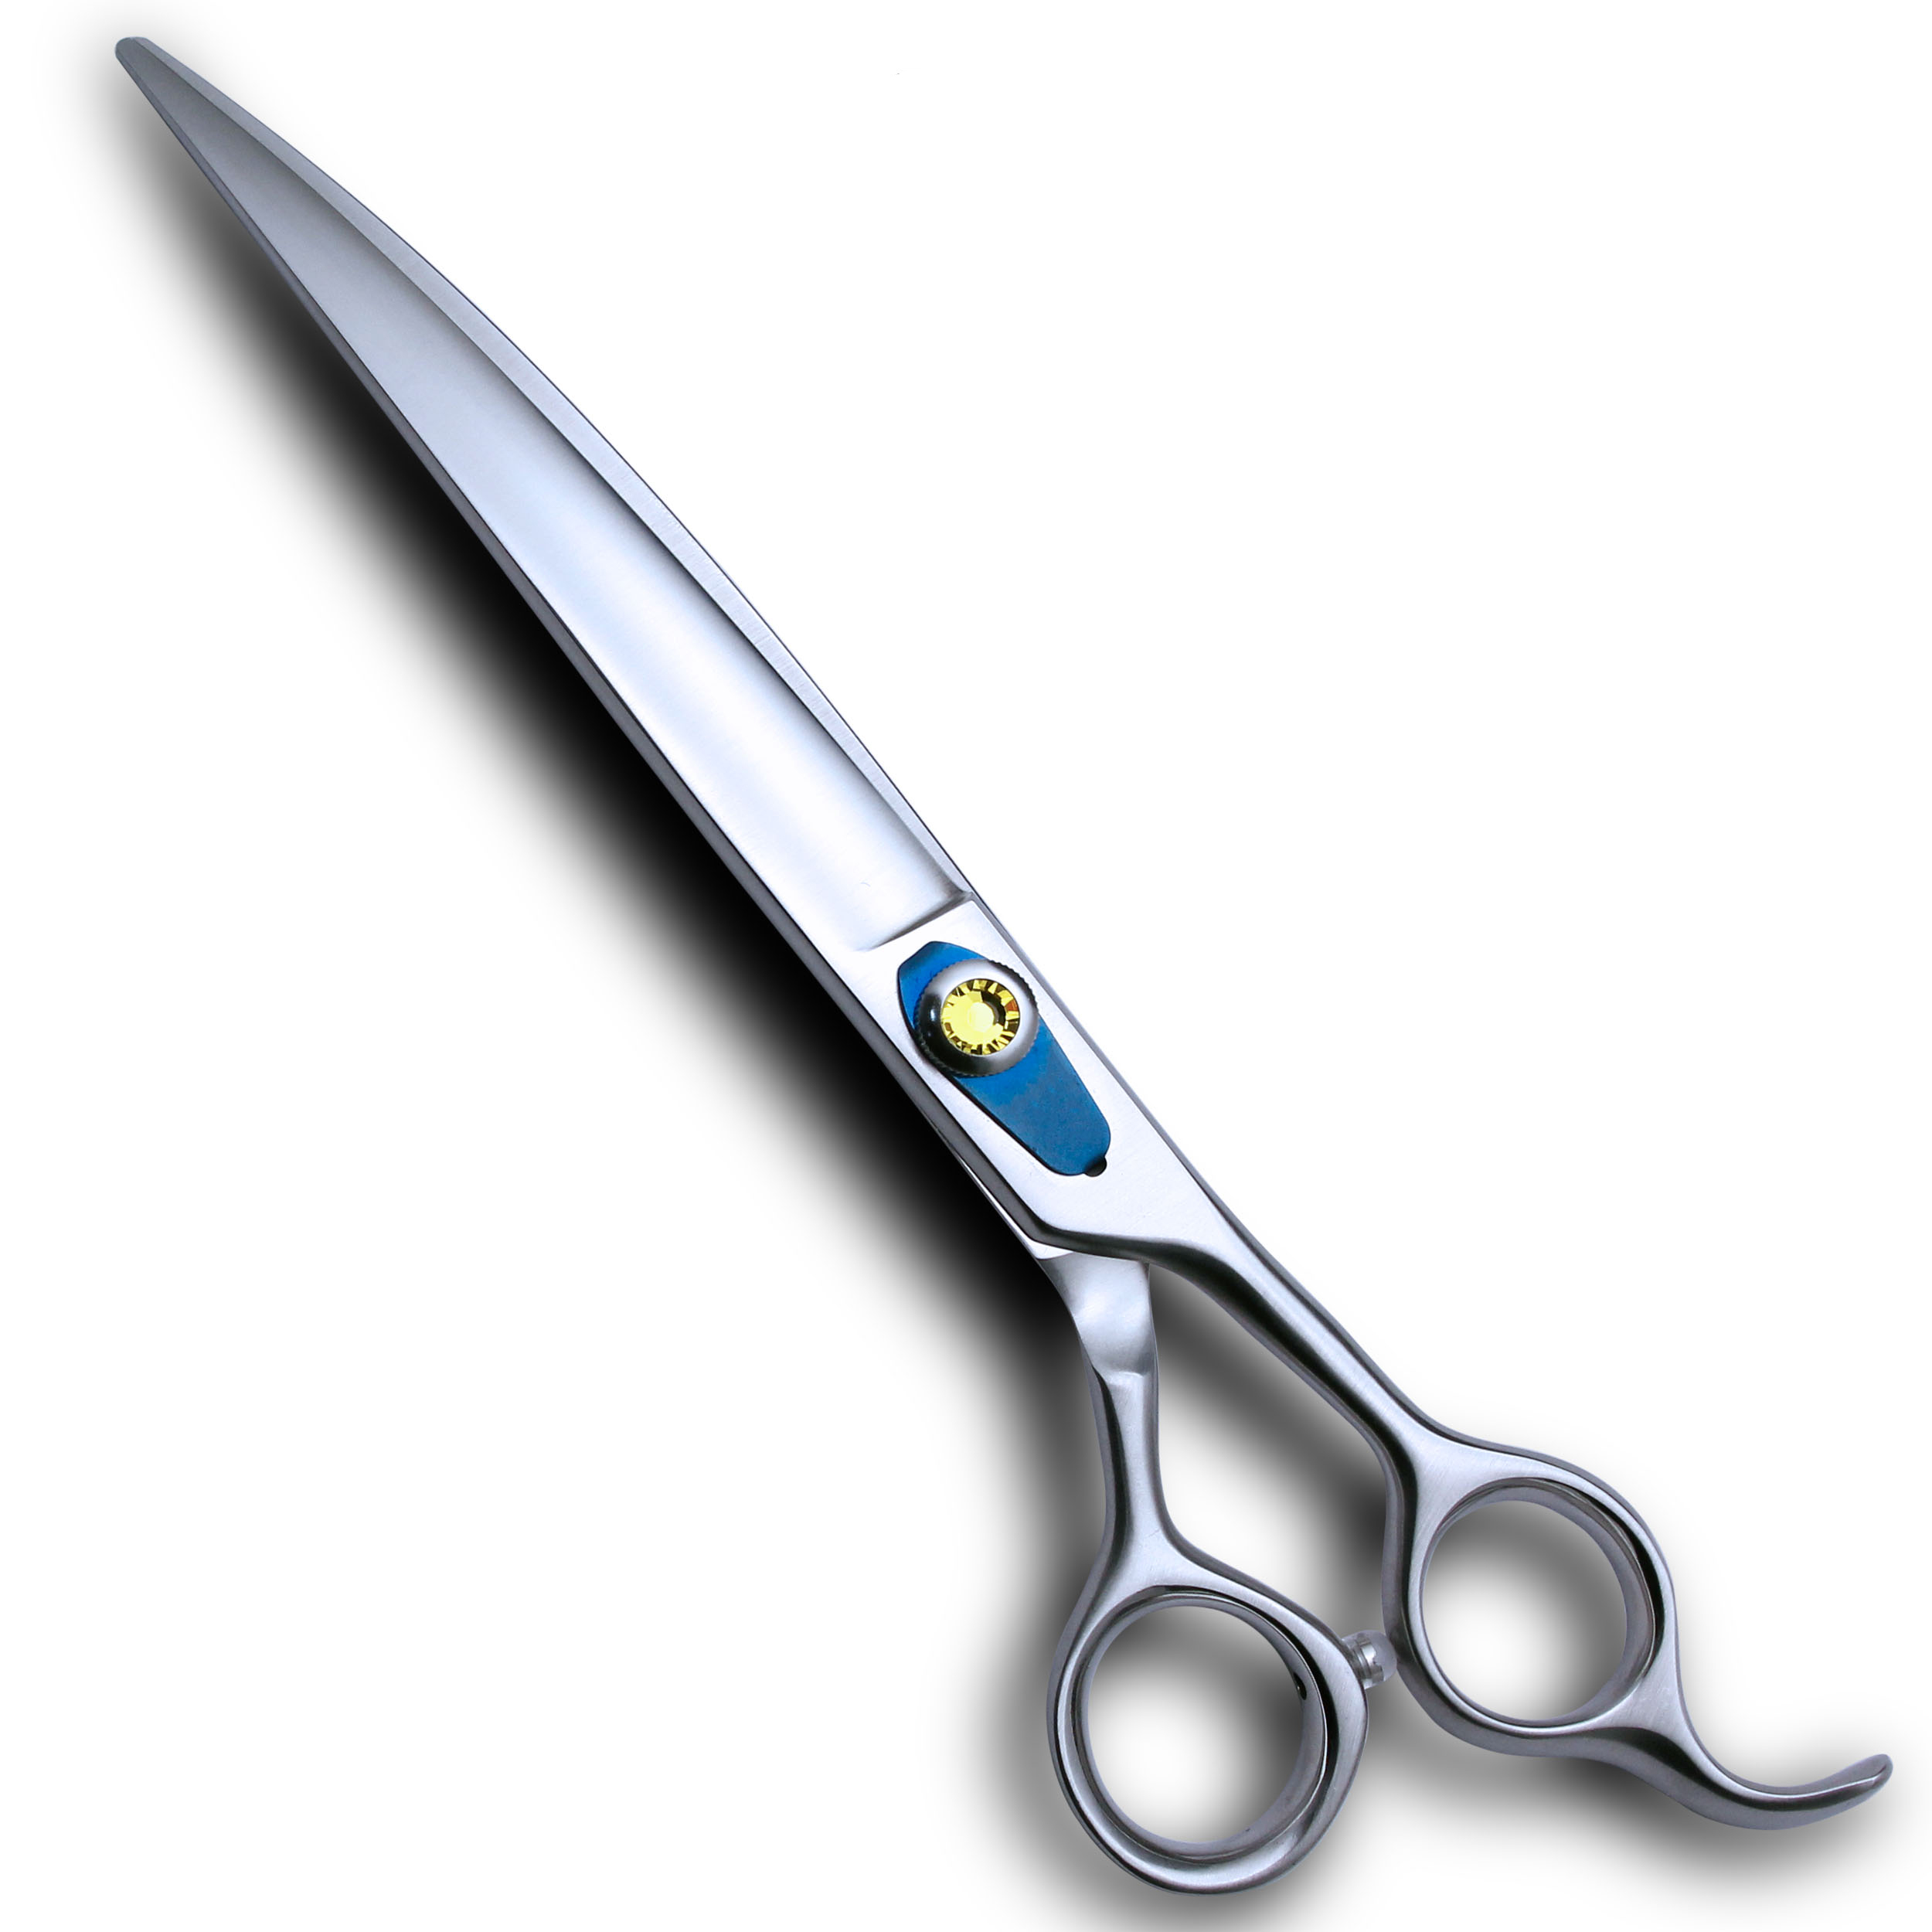 JP440C 8 inch Thick Handle Pet Grooming Curved Scissors